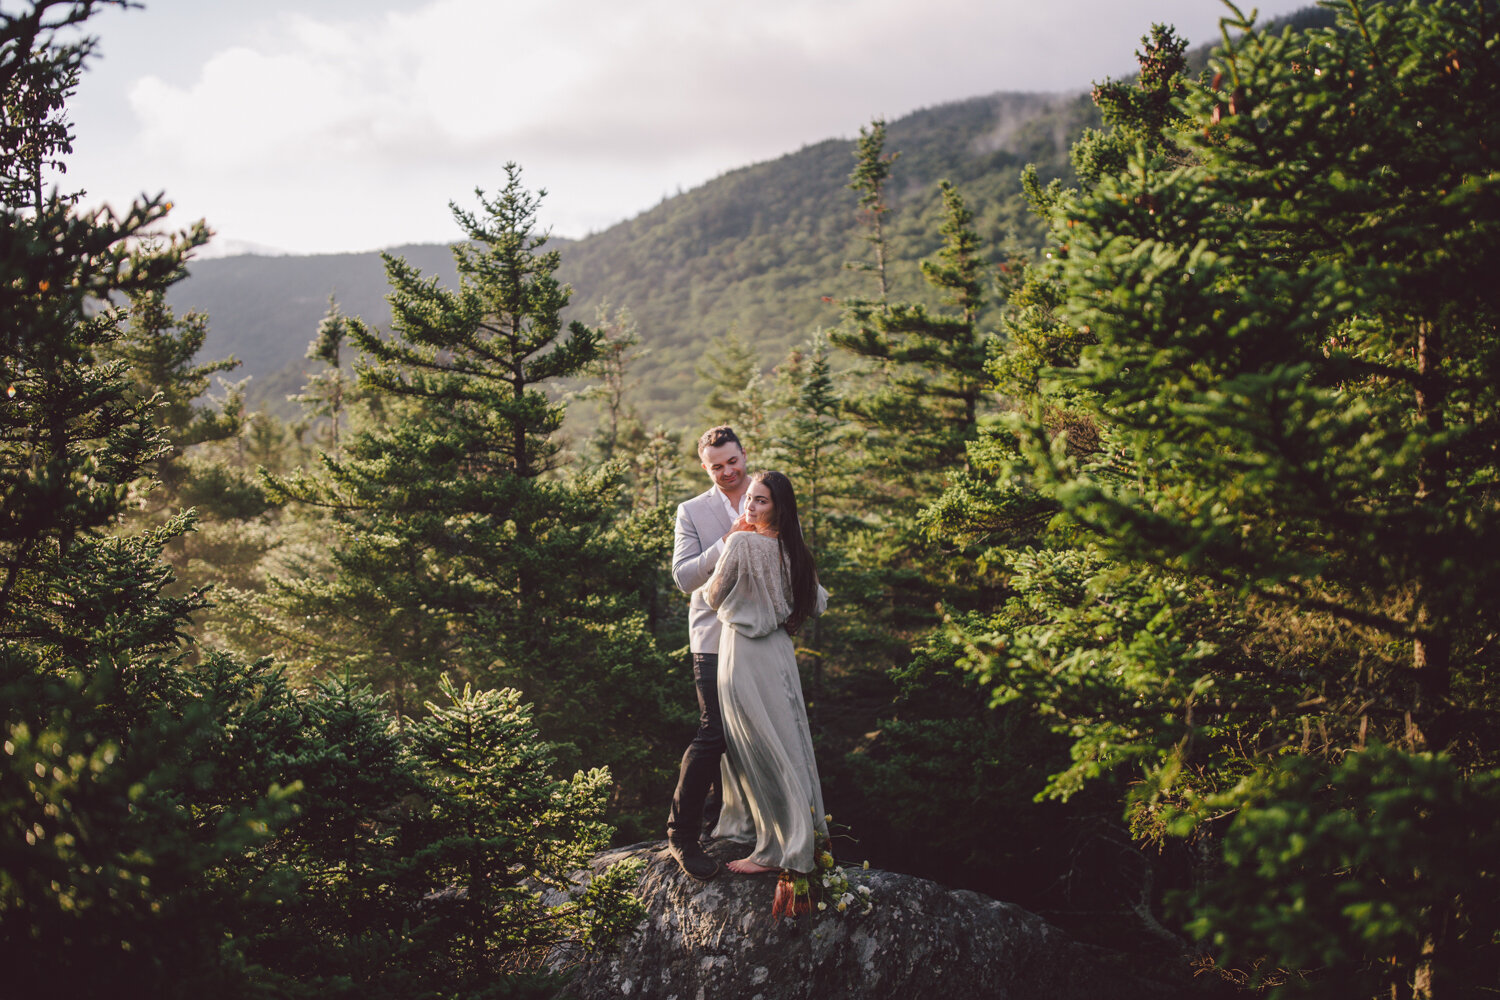 Elopements in forest, vermont elopement photographer, vermont elopement ideas, vermont elopement packages, where to elope in vermont, stowe wedding, white mountains elopement, stowe elopement, mountain elopement, sunrise elopement, new england elopement, east coast elopement, adventure elopement, explore vermont, stowe vermont summer, hiking elopement, hiking elopement dress, adventure elopement dress, white mountains new hampshire elopement, asos wedding dress, vermont wedding florist, boho